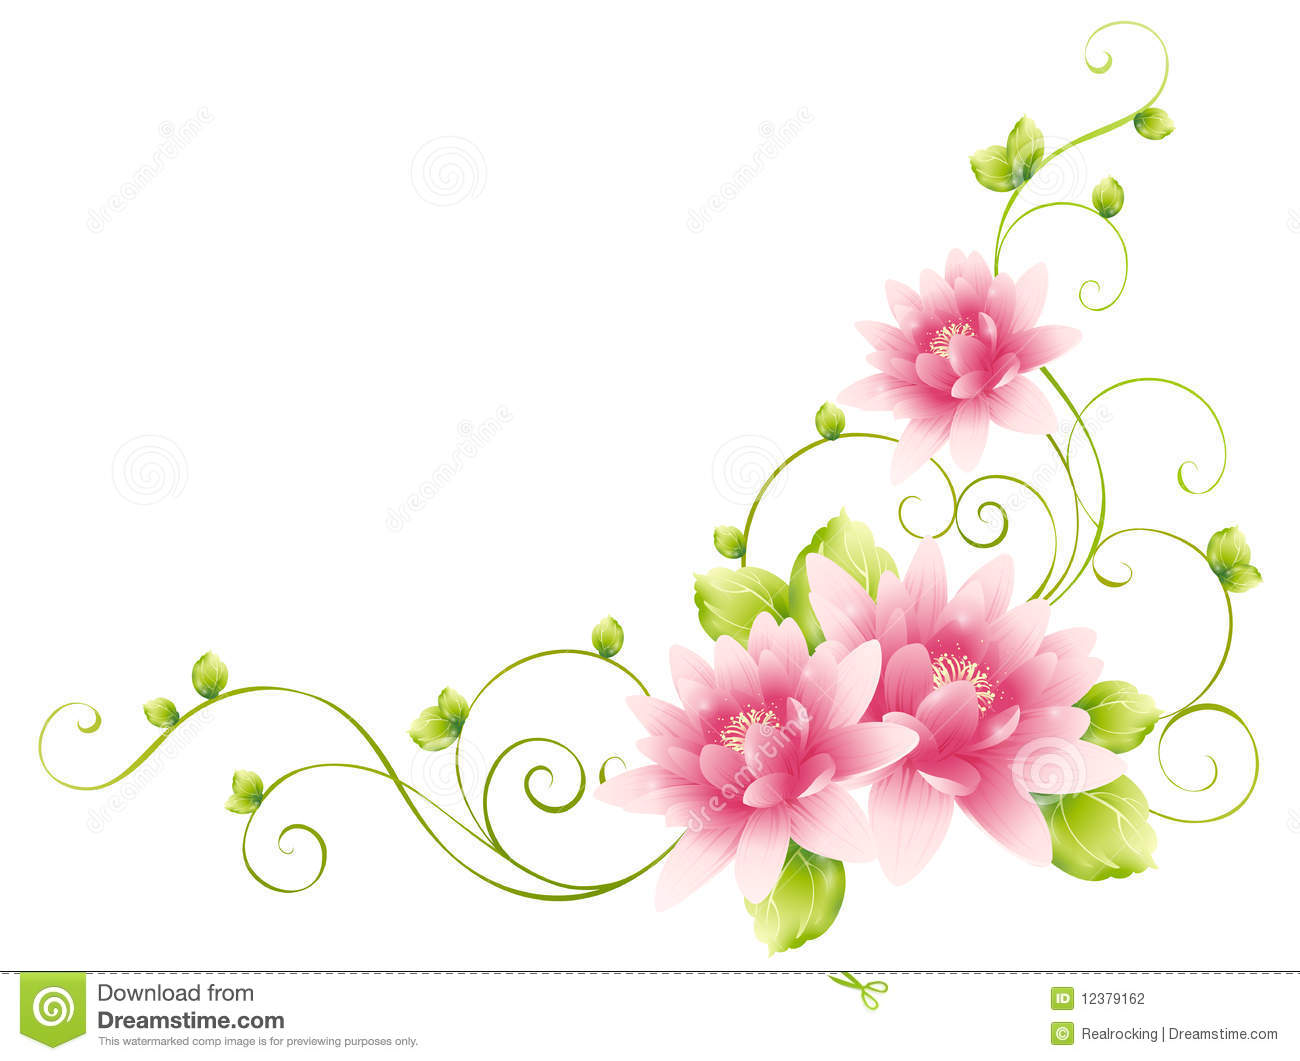 Stock Photography  Flower And Vines  Image  12379162